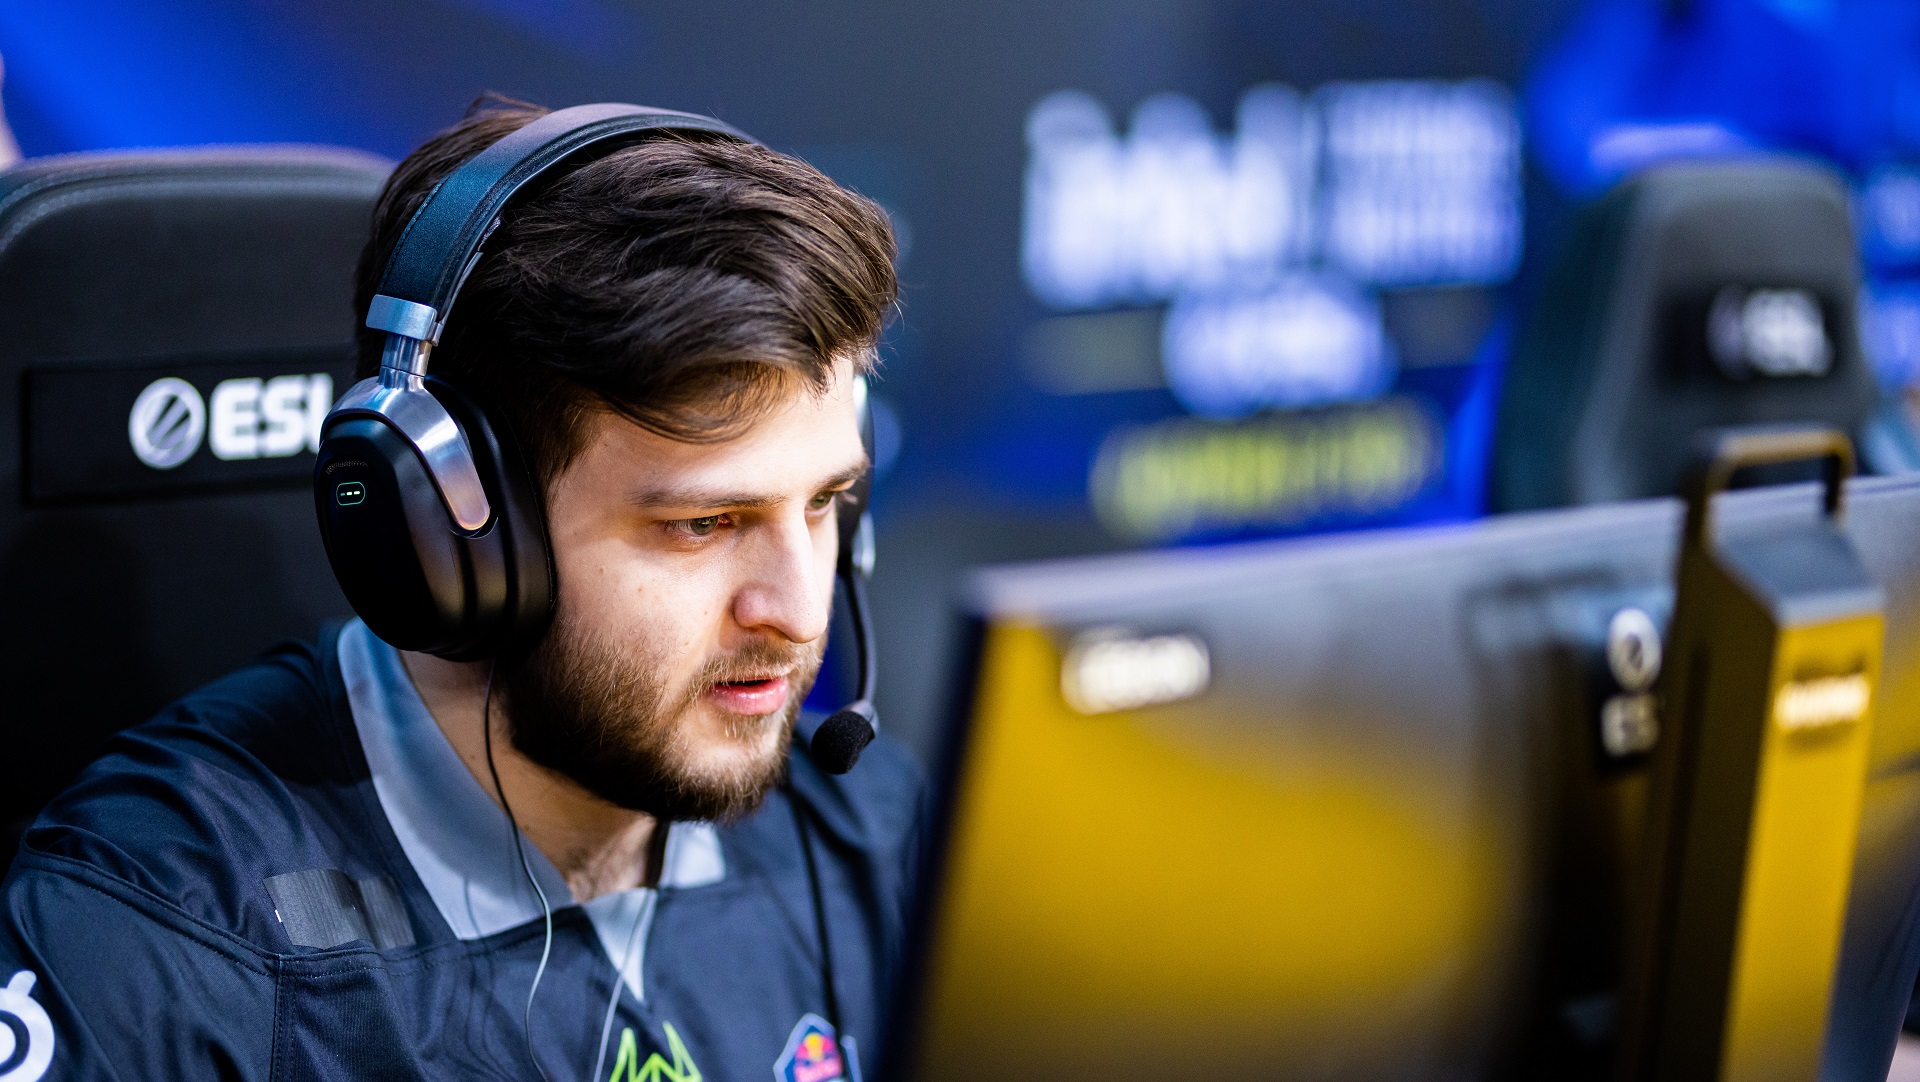 OG обыграла Sprout на IEM Katowice Play-In